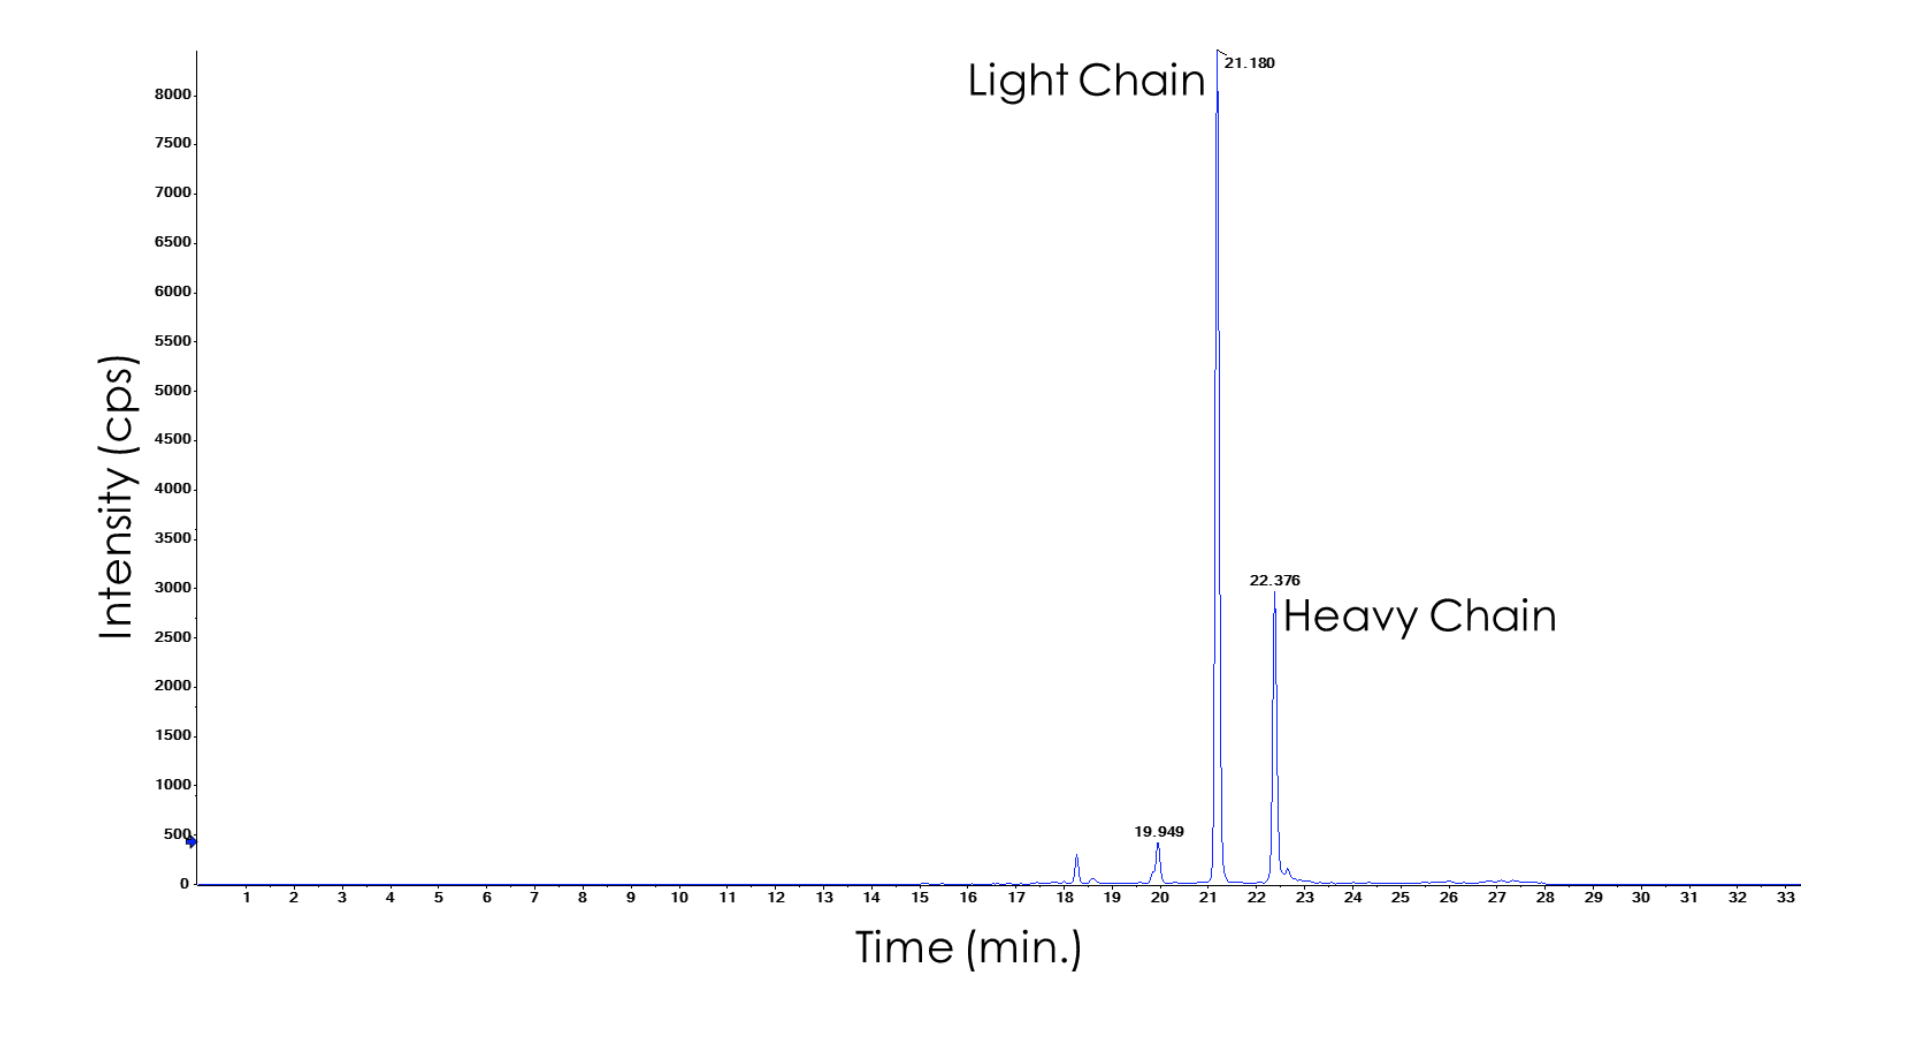 Protein analysis and characterization spectrometer chart - Intact analysis of glycoforms and protein alone, heavy and light chain